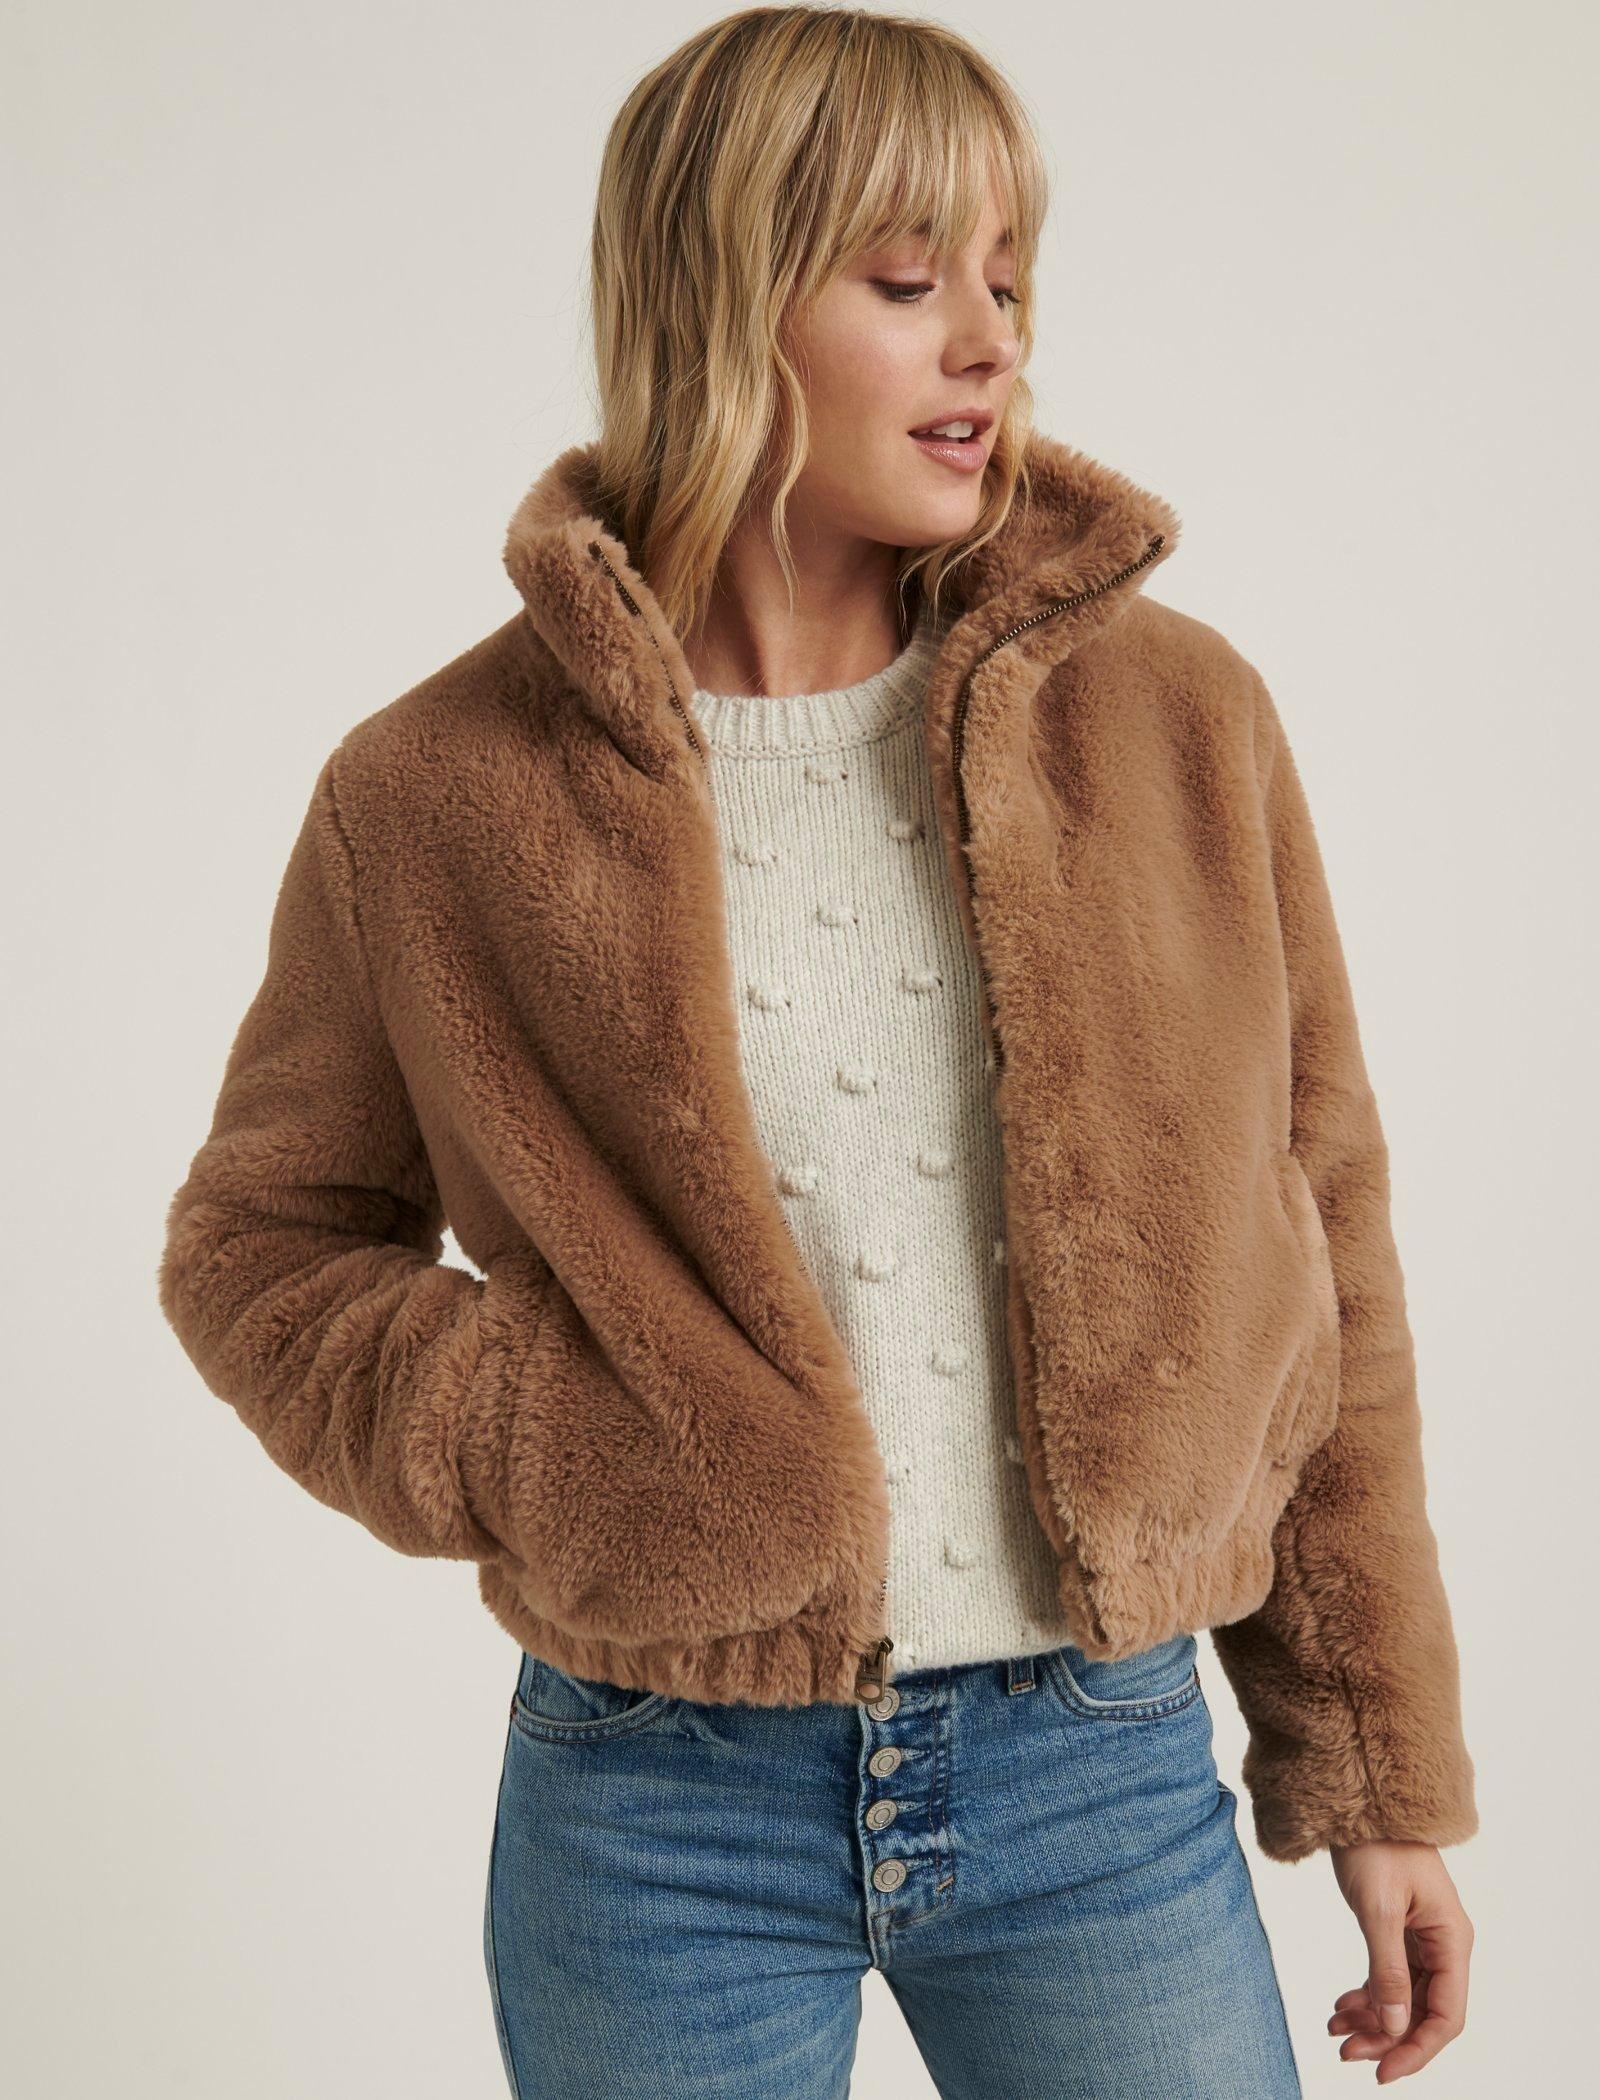 lucky brand jean jacket with fur